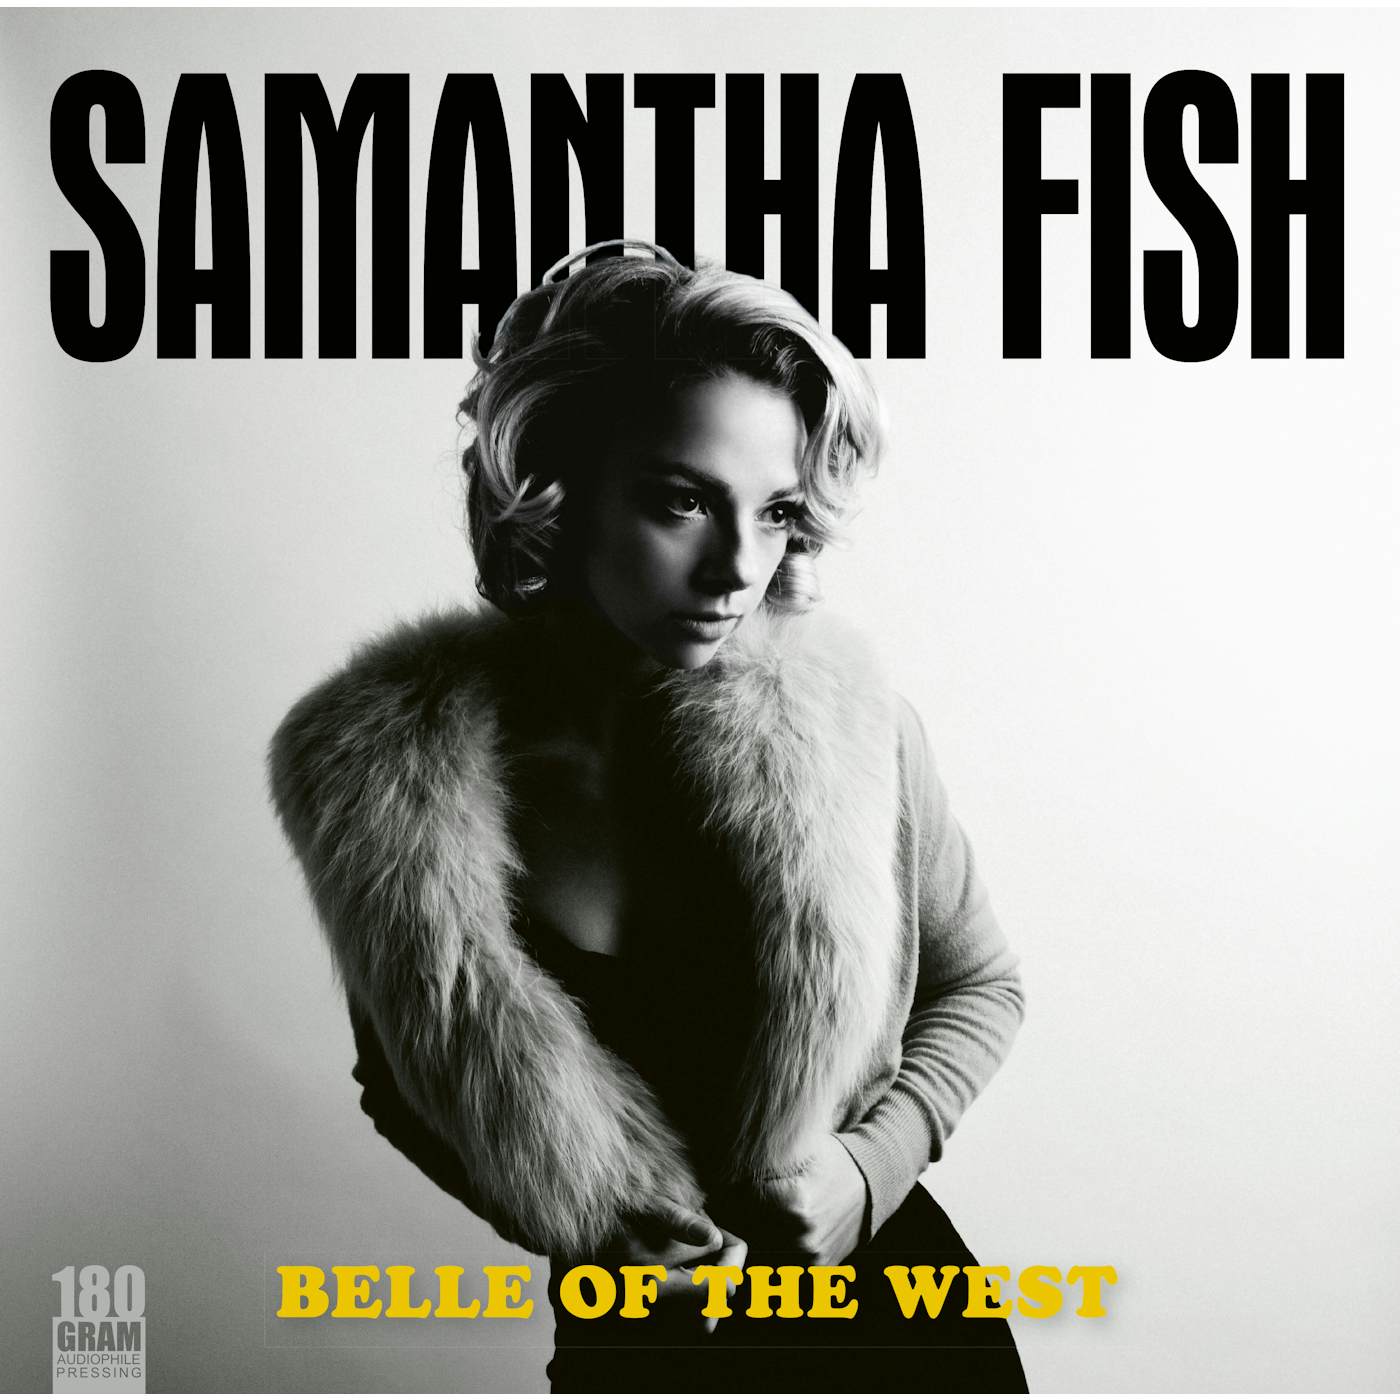 Samantha Fish Belle of the West Vinyl Record